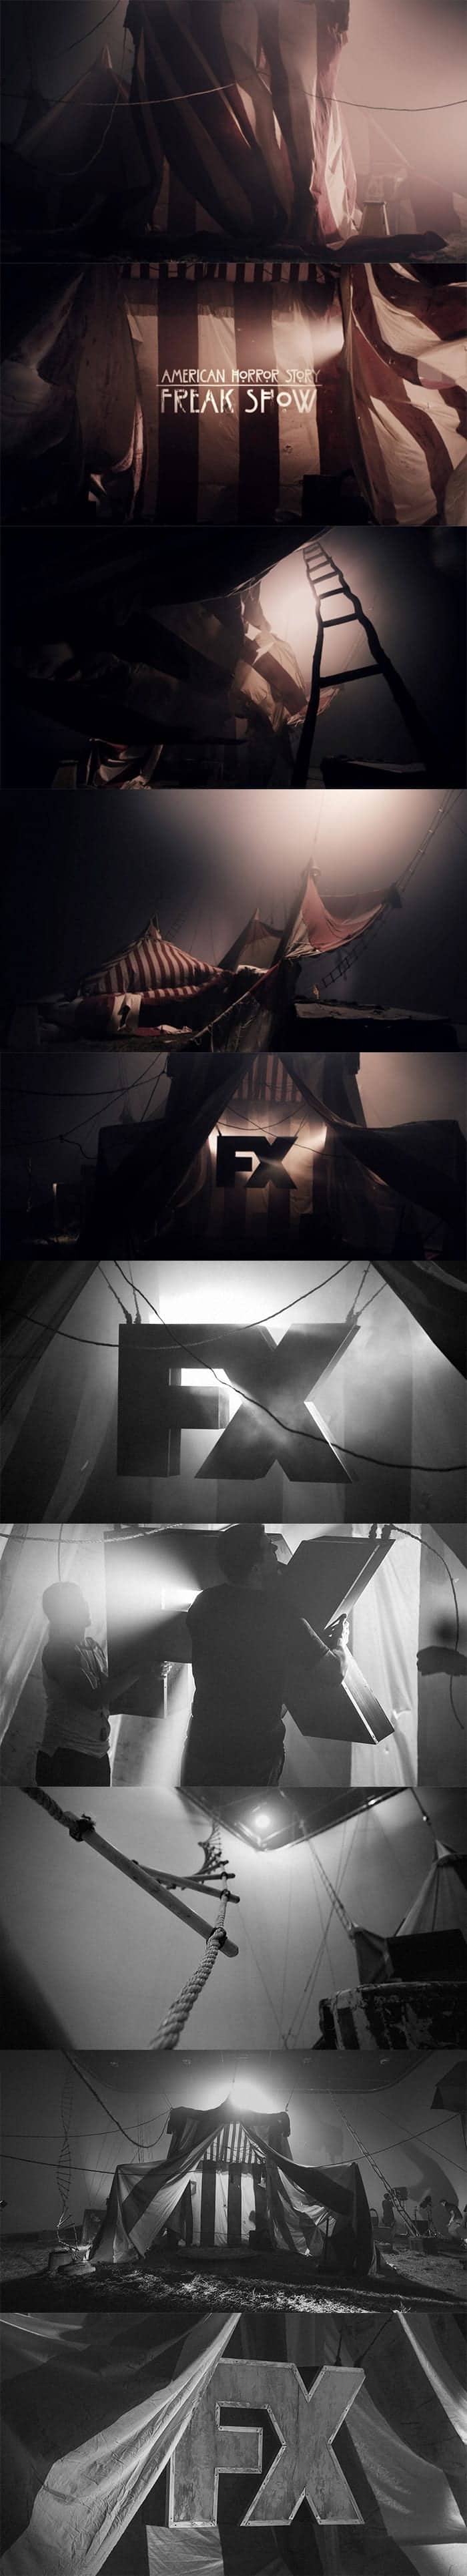 Maint-Title-Sequence-FX